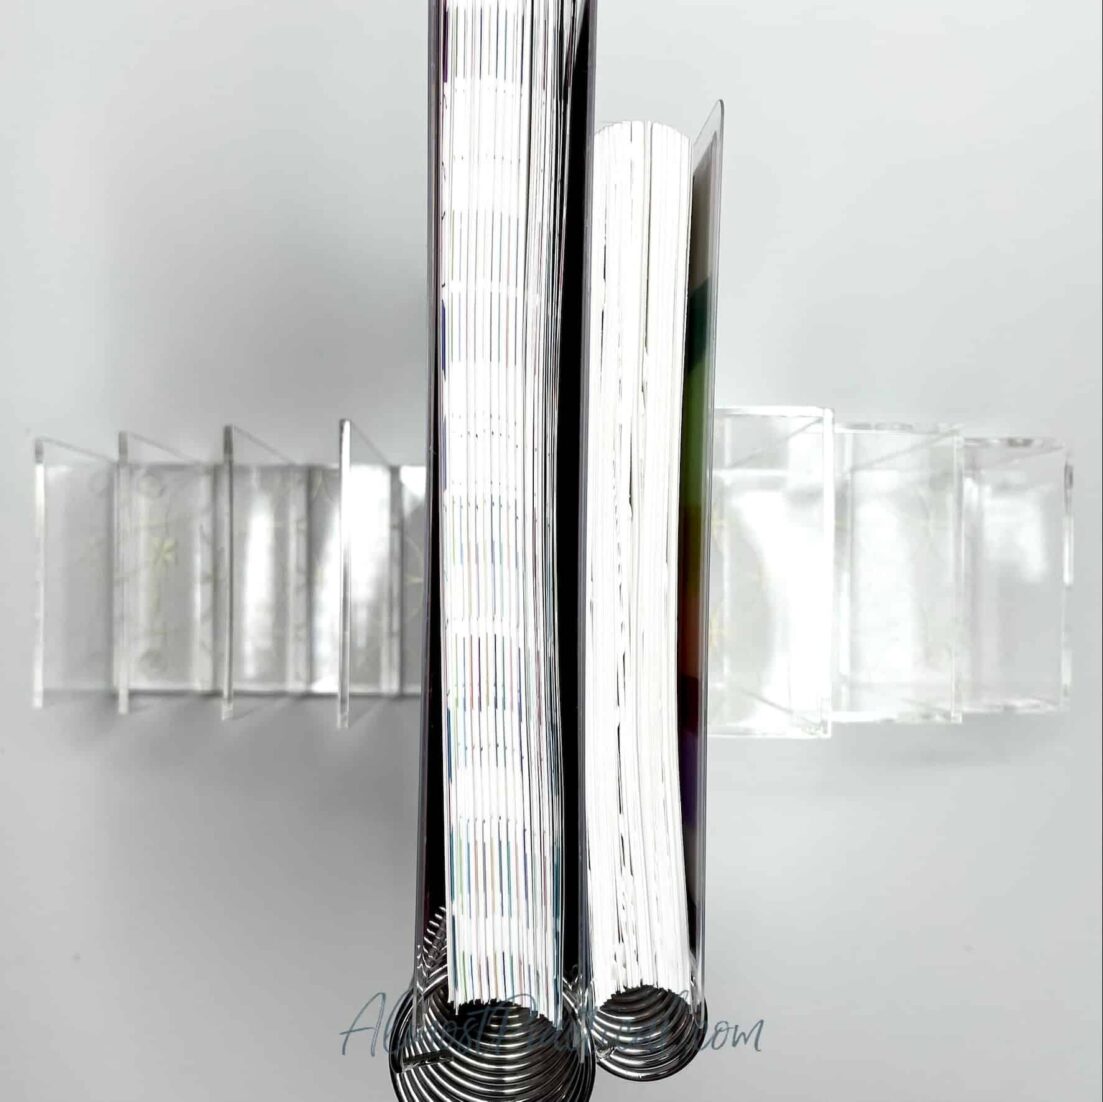 Acrylic bookends with coiled notebooks in between.